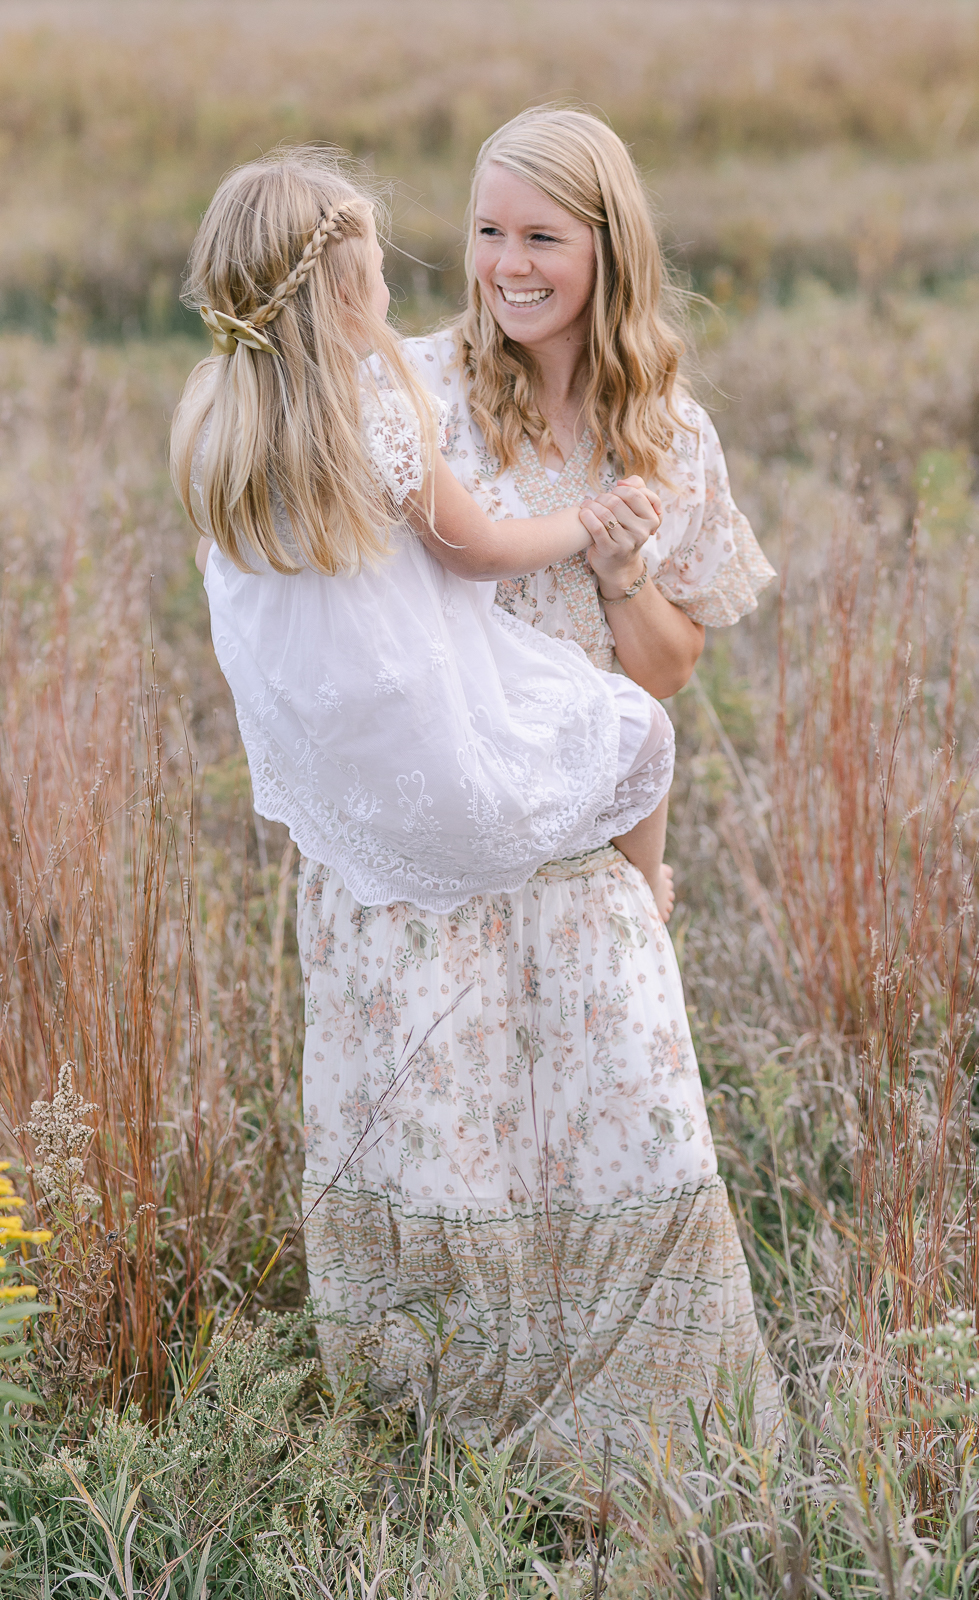 Plymouth, Michigan family photographer, Laurel Smith Photography captures a mom walking through a tall grass field while holding her daughter. tall grass family photos, plymouth michigan family photographer, ivory and white maxi dress with flutter sleeves, womens medium length blonde waved hair, little girl's half up braid with bow #DetroitMichiganFamilyPhotographer #DetroitMichiganPhotographer #FamilyPhotoOutfitInspiration #PlymouthMichiganFamilyPhotographer #PlymouthMichiganPhotographer #ExtendedFamilyPhotos #DetroitMichiganFallFamilyPhotos #LetThemBeLittle #LetTheKids #DetroitMichiganLifestylePhotographer